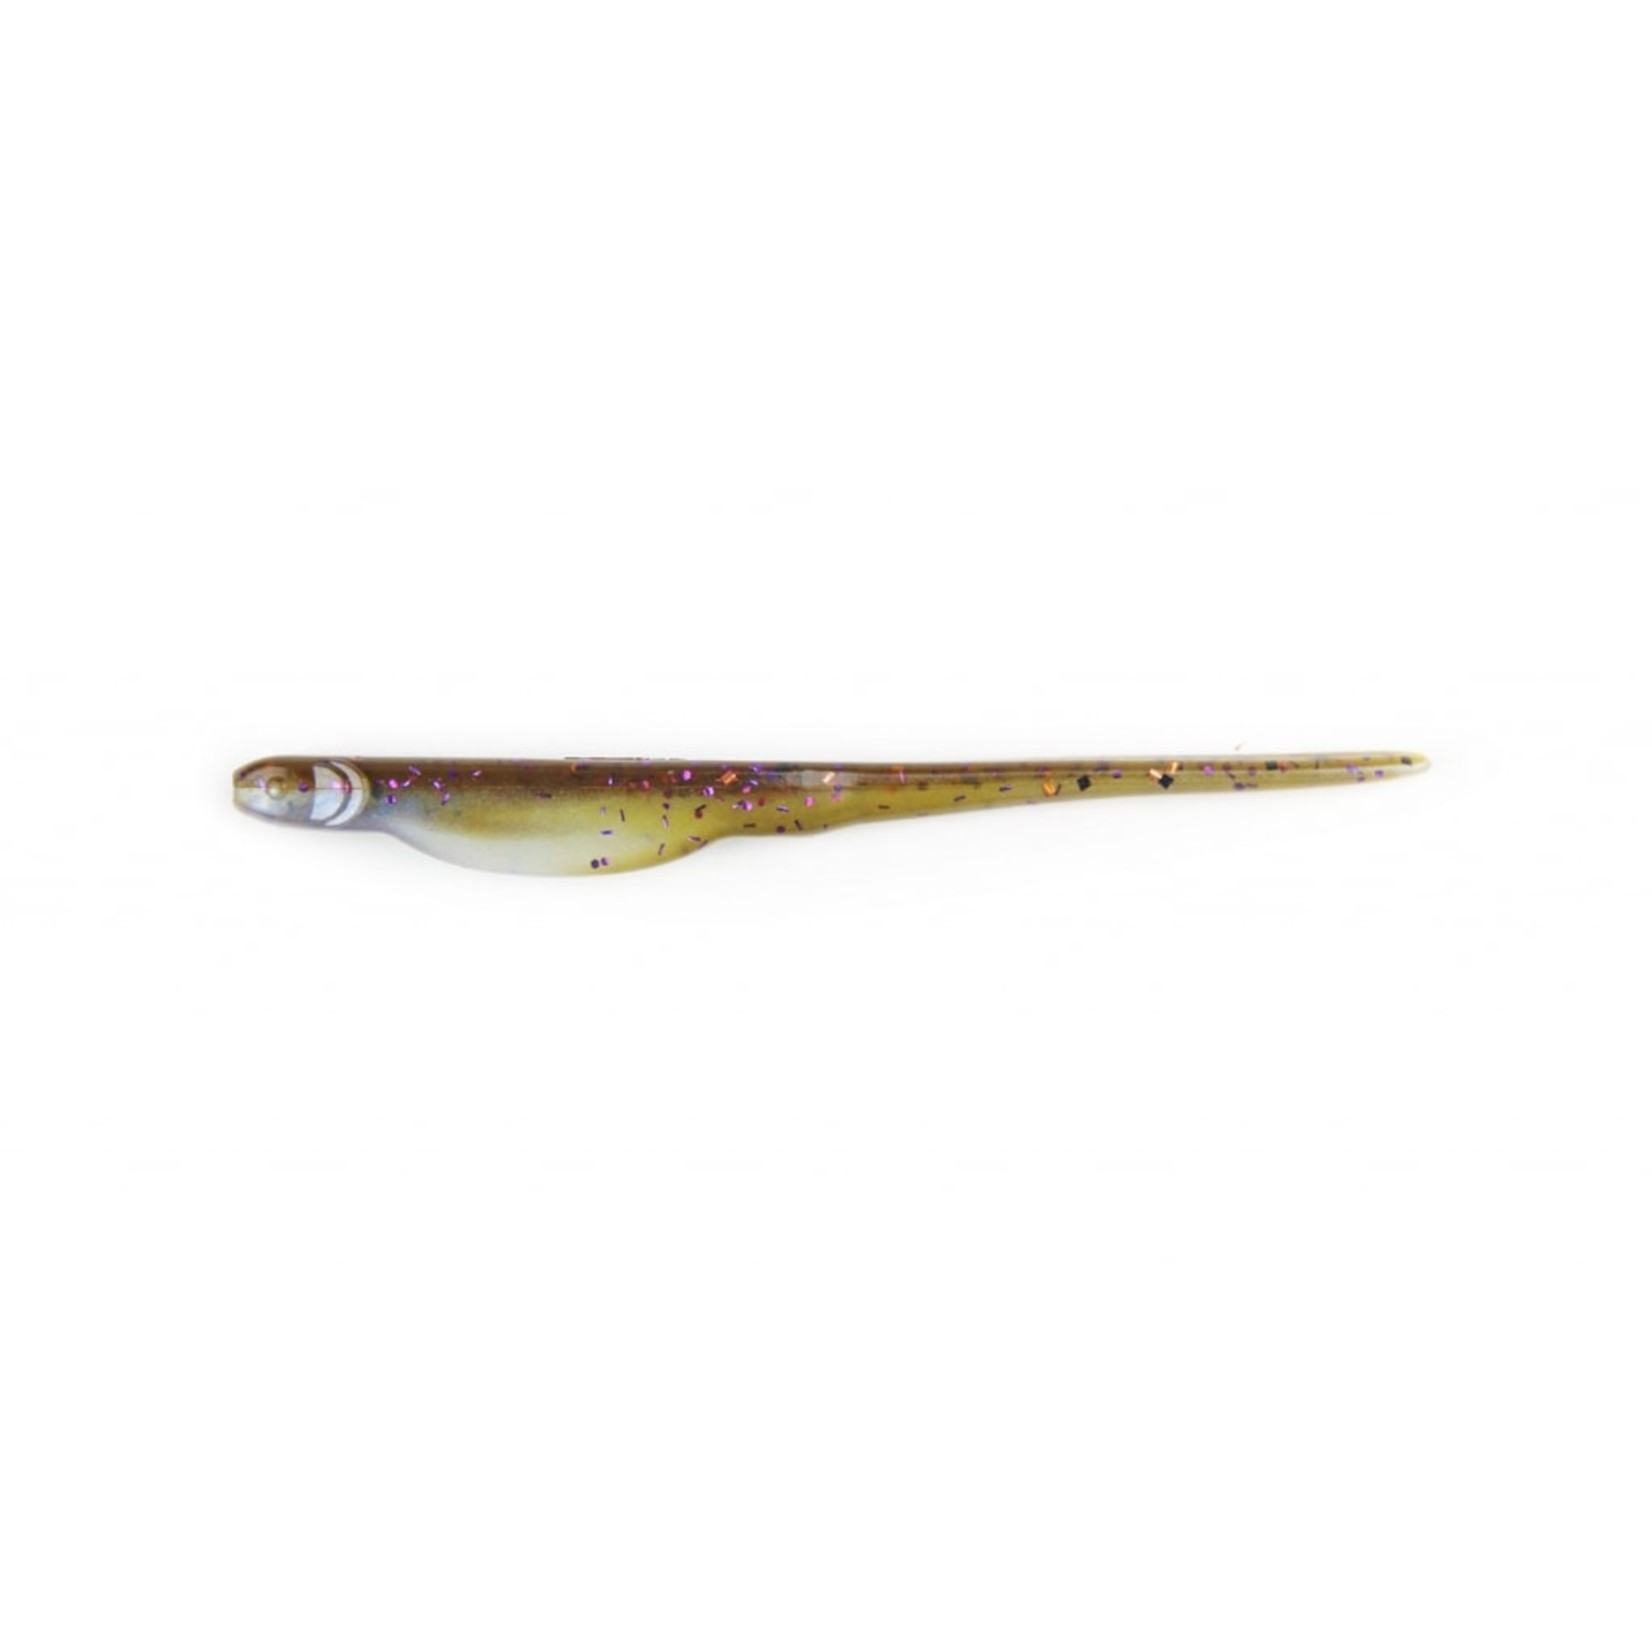 X Zone Lures X-Zone Lures Whiplash Shad - 6" (8 Pack)